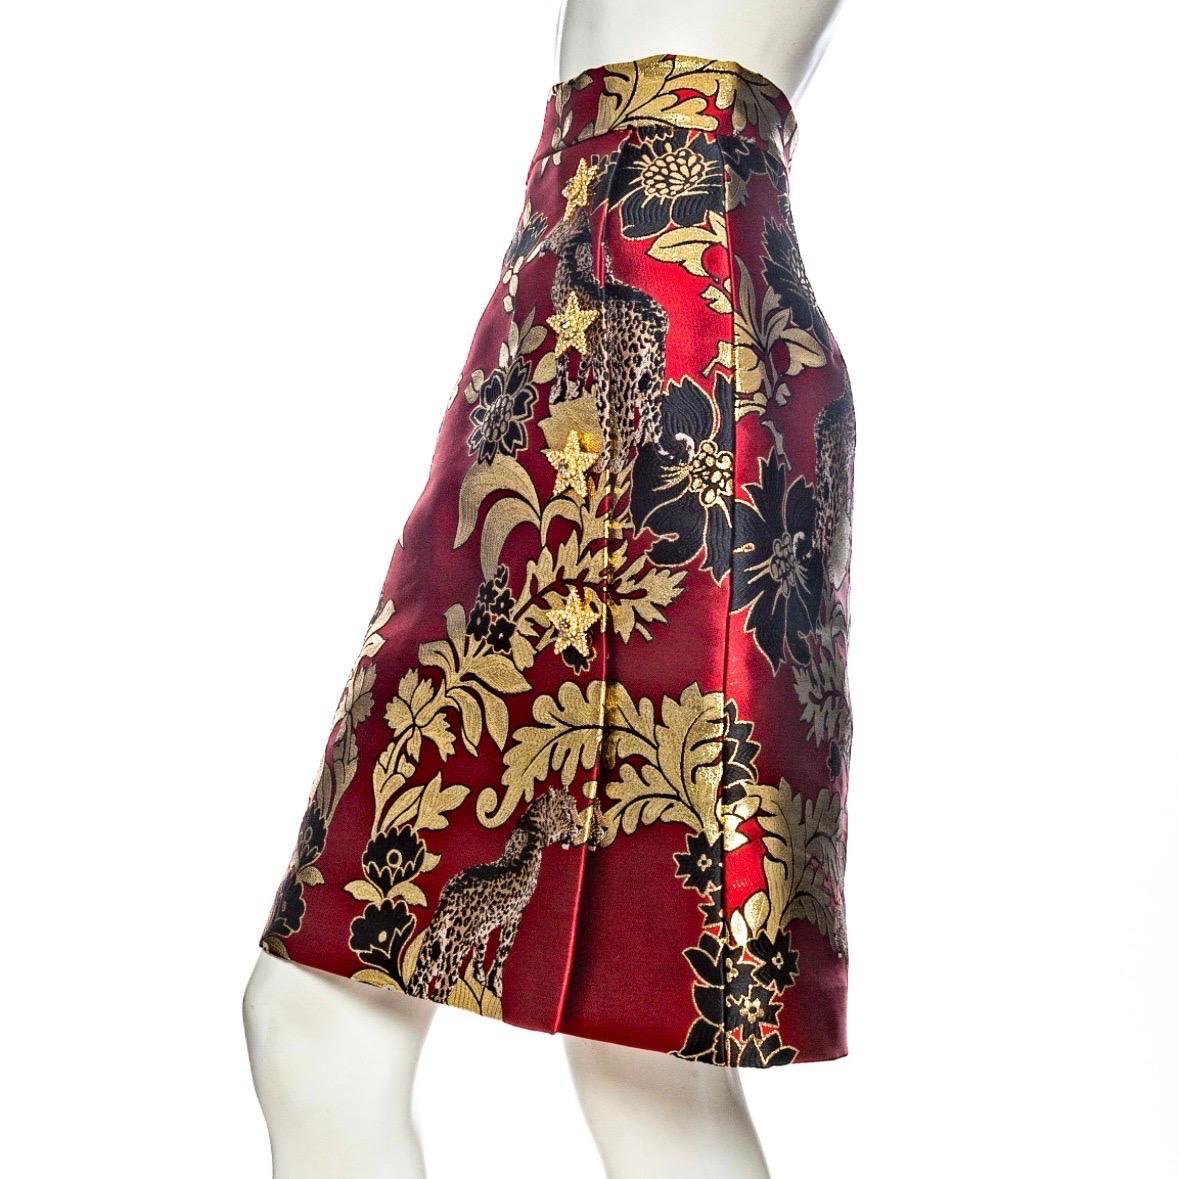 Dolce & Gabbana Gold and Red Leopard Motif Jacquard Jacket and Skirt Set For Sale 7